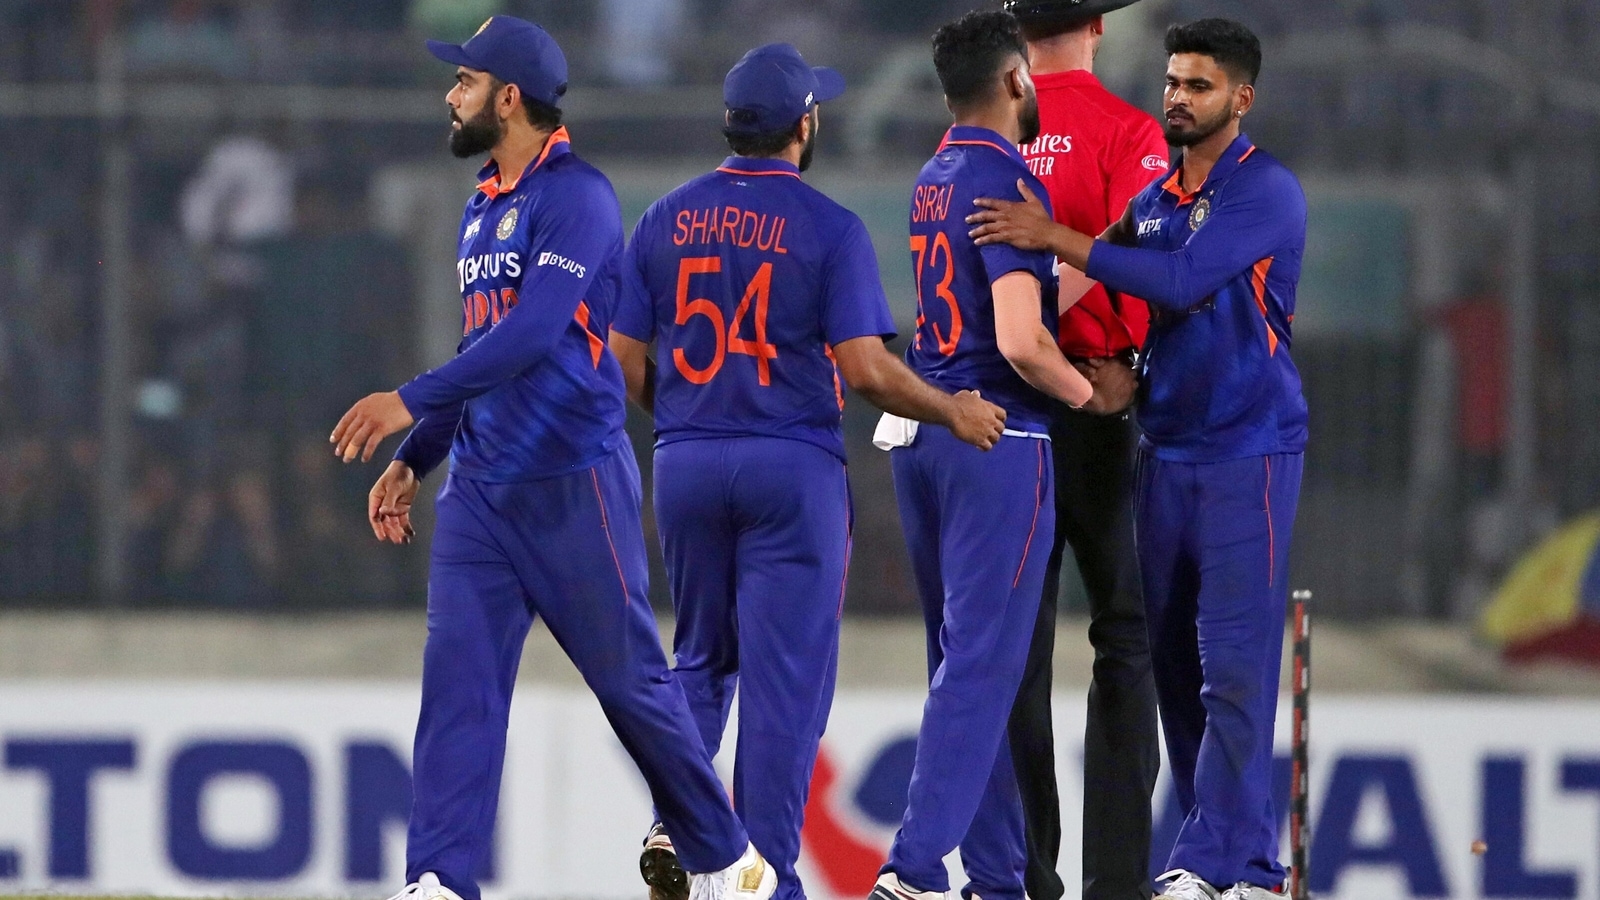 India vs Bangladesh 2nd ODI LIVE streaming When and where to watch LIVE on TV Cricket